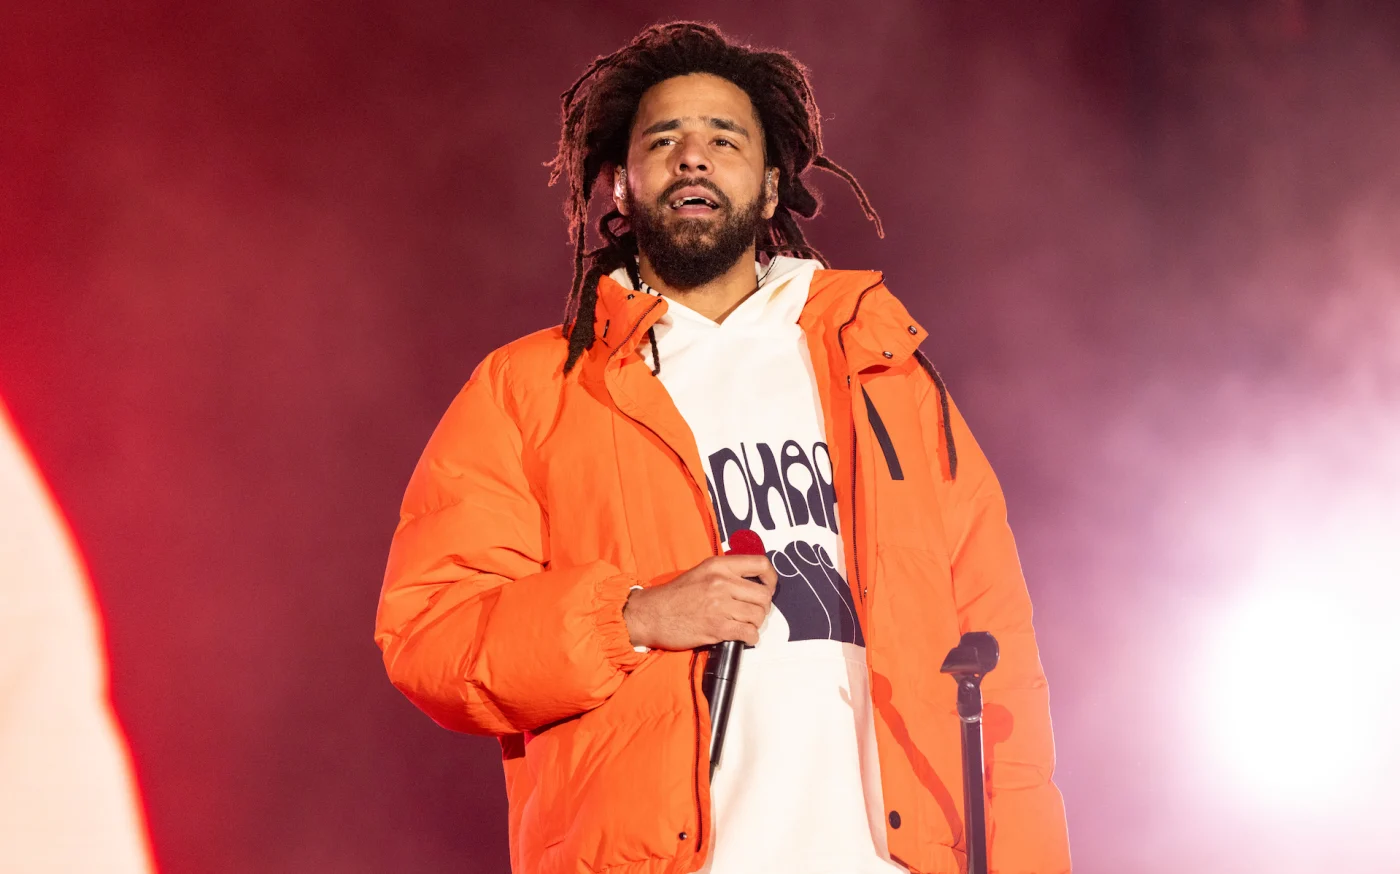 J Cole - Real Name, Wife, Child, Net Worth, Songs, Albums And Wiki